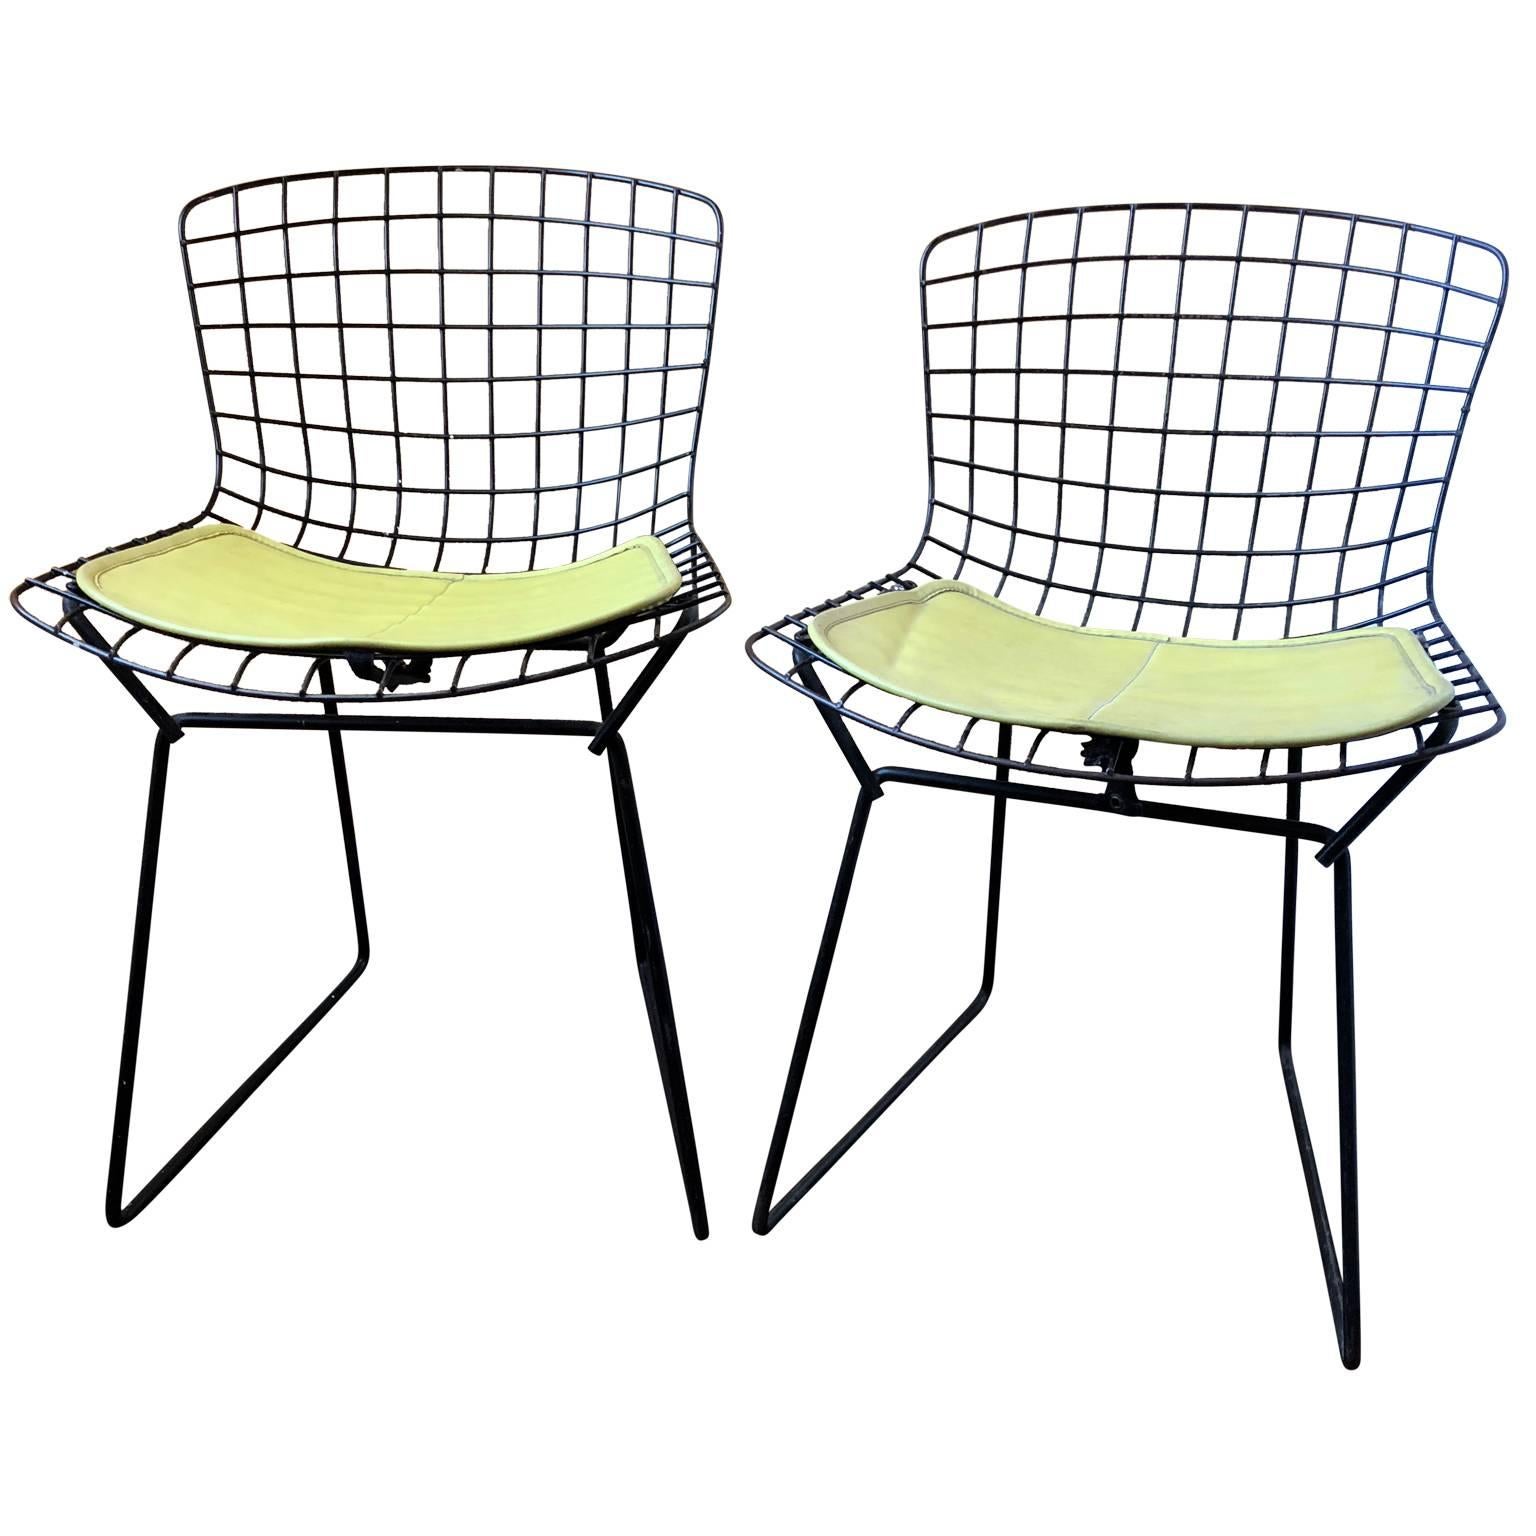 Pair of Smaller Black Wire Bertoia Children's Chairs with Yellow Fabric by Knoll